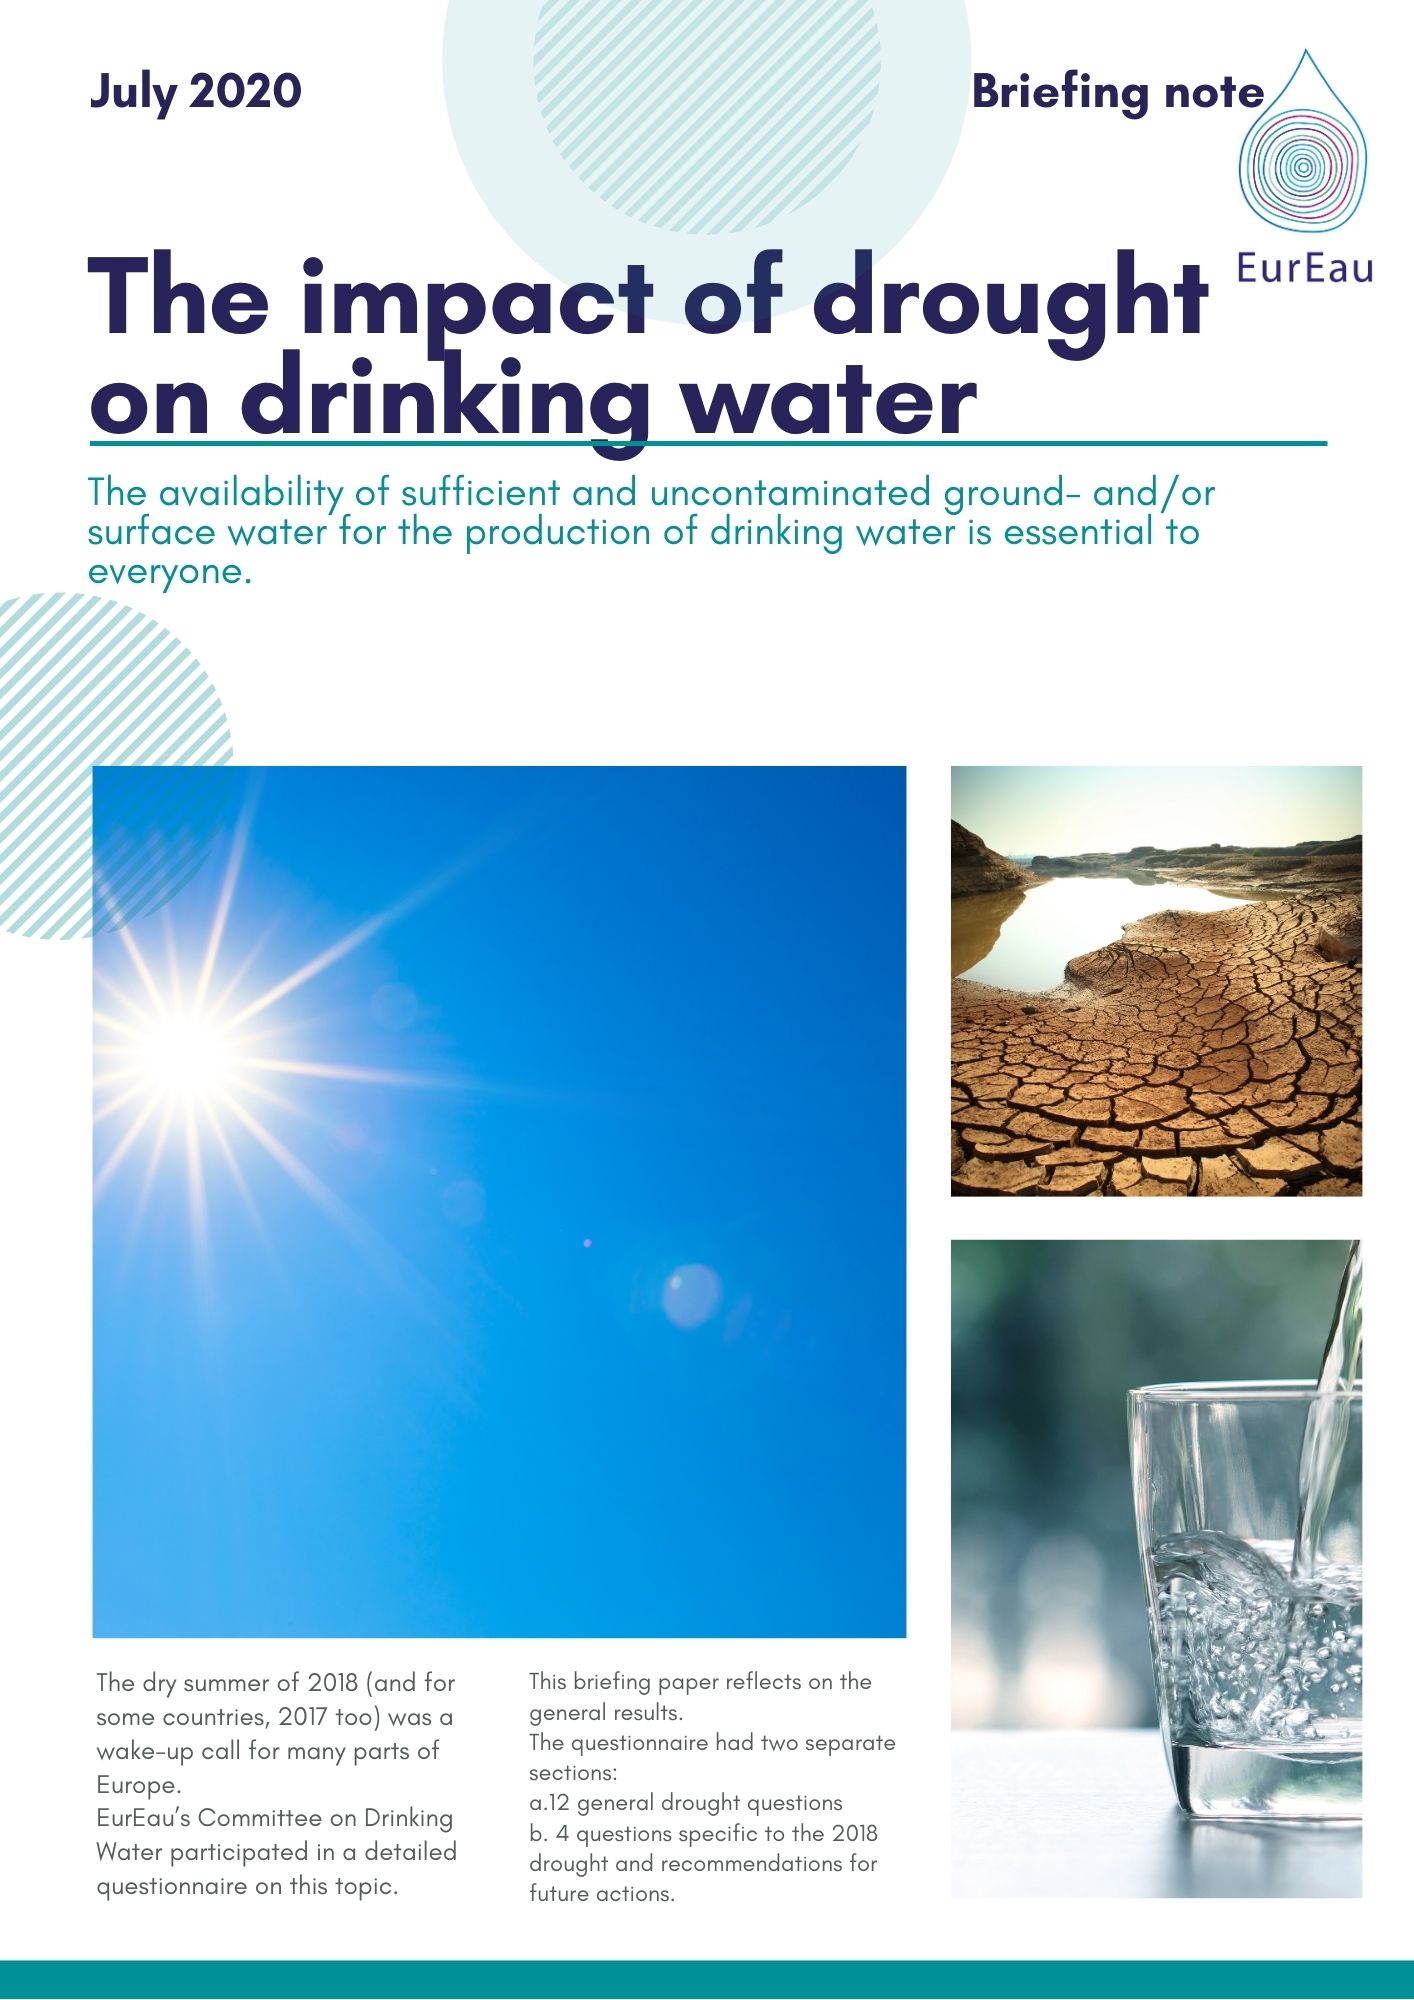 Briefing note on the impact of drought on drinking water